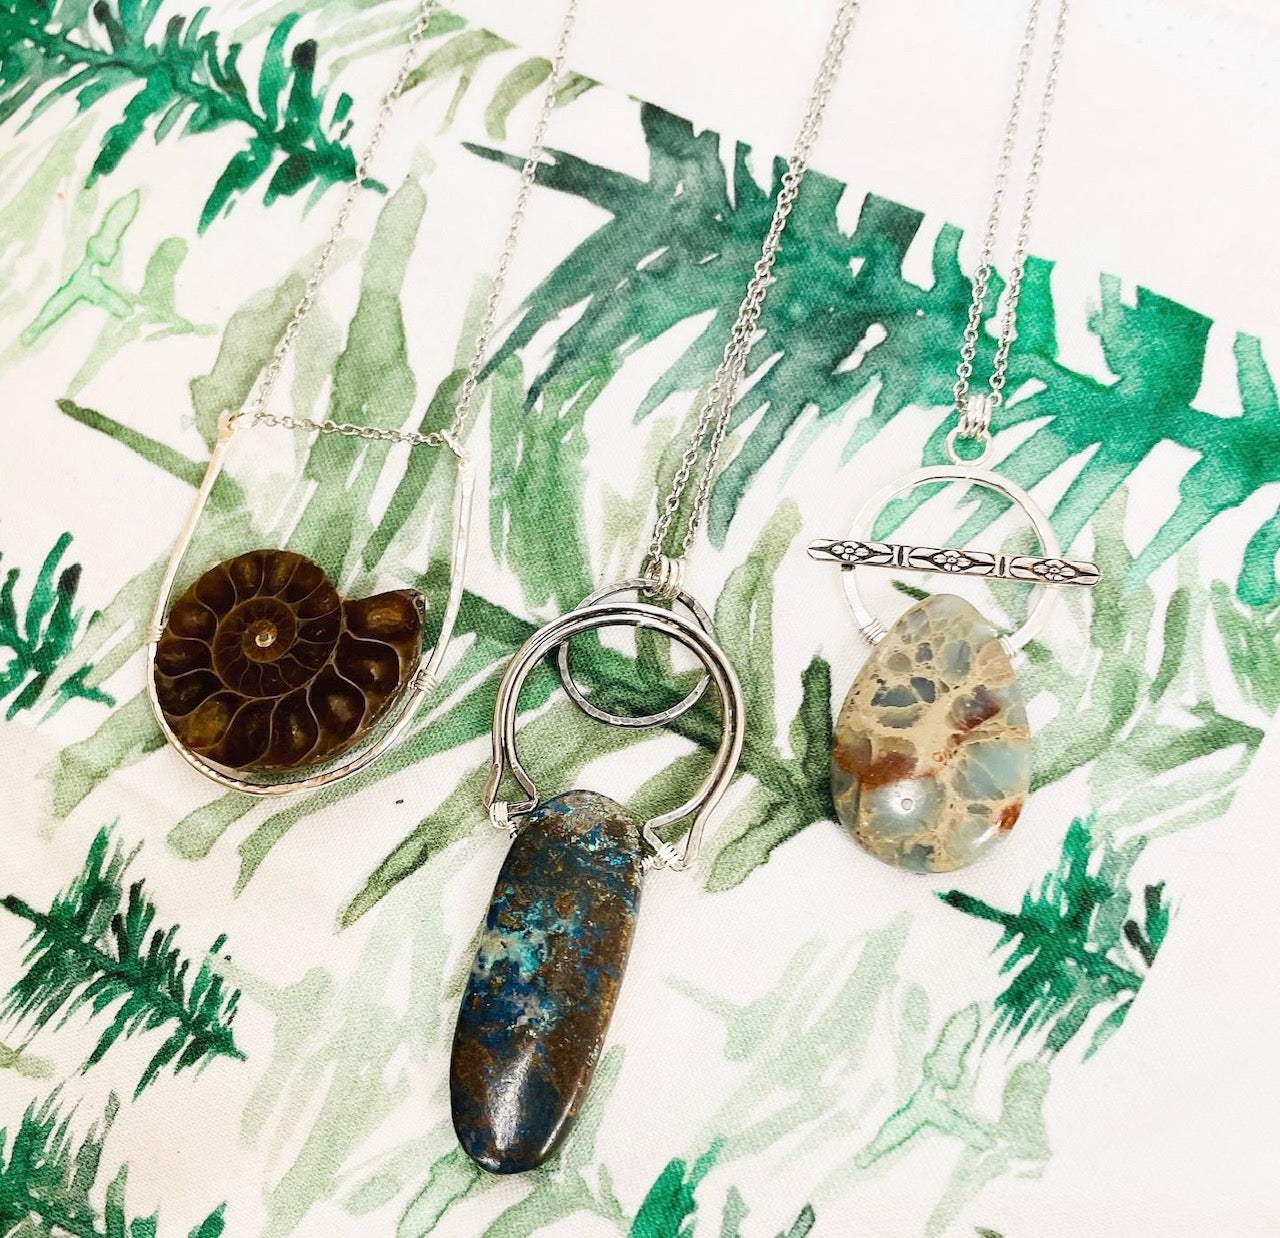 Image shows three silver necklaces, one with a brown ammonite pendant, and two with blue jasper stone pendants. the necklaces lay on a printed cloth background.